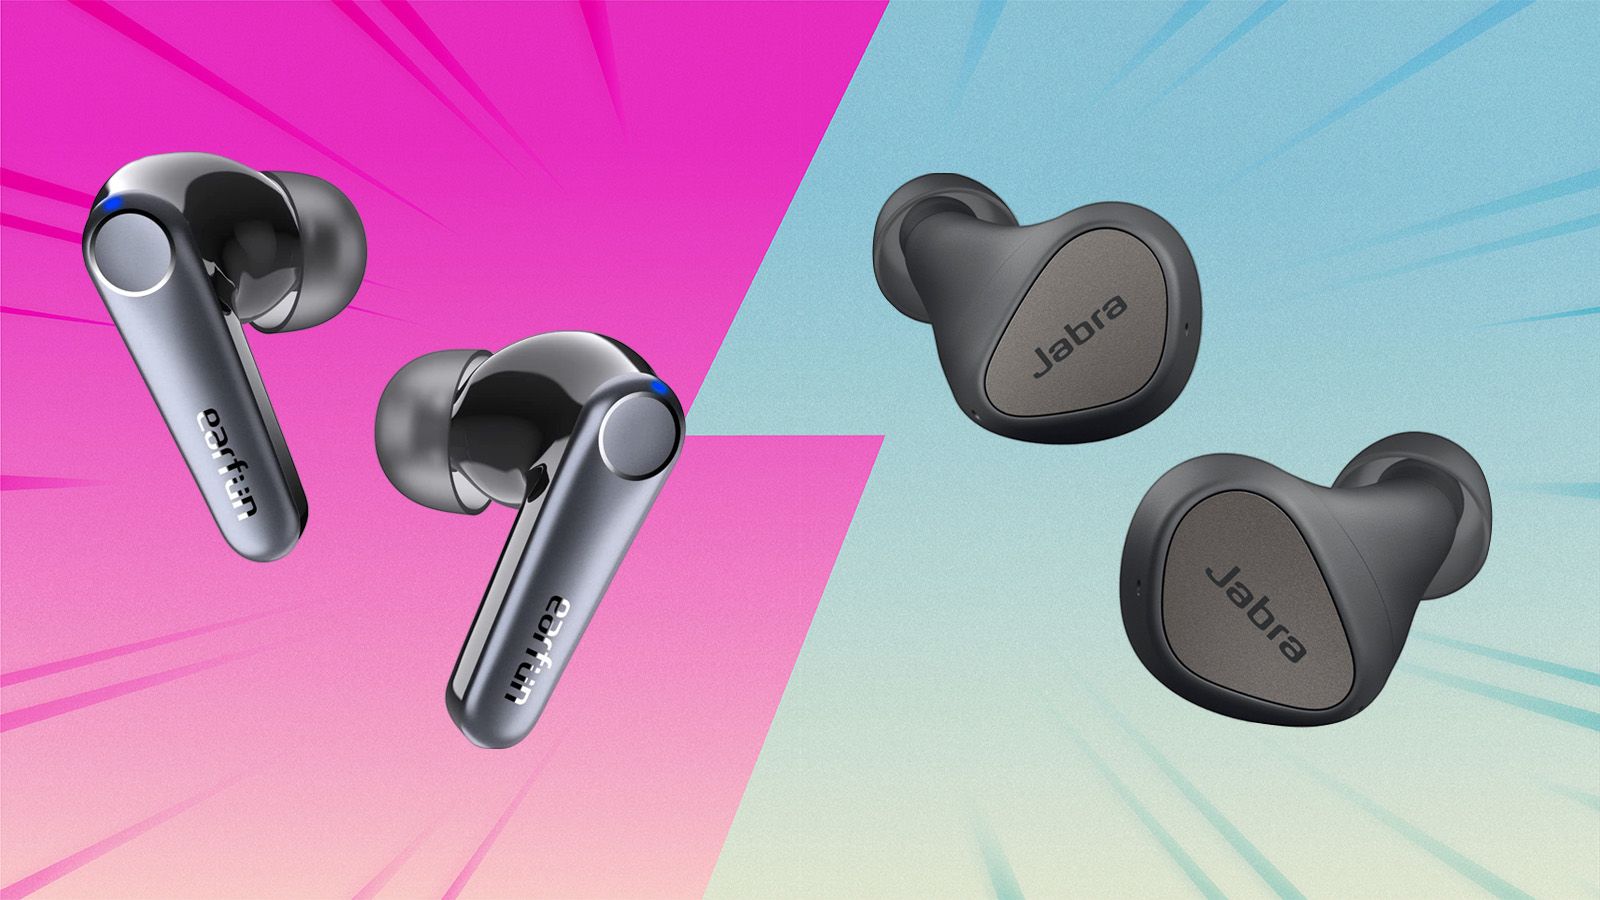 Huawei FreeBuds Pro review: Impressive ANC earbuds for Android